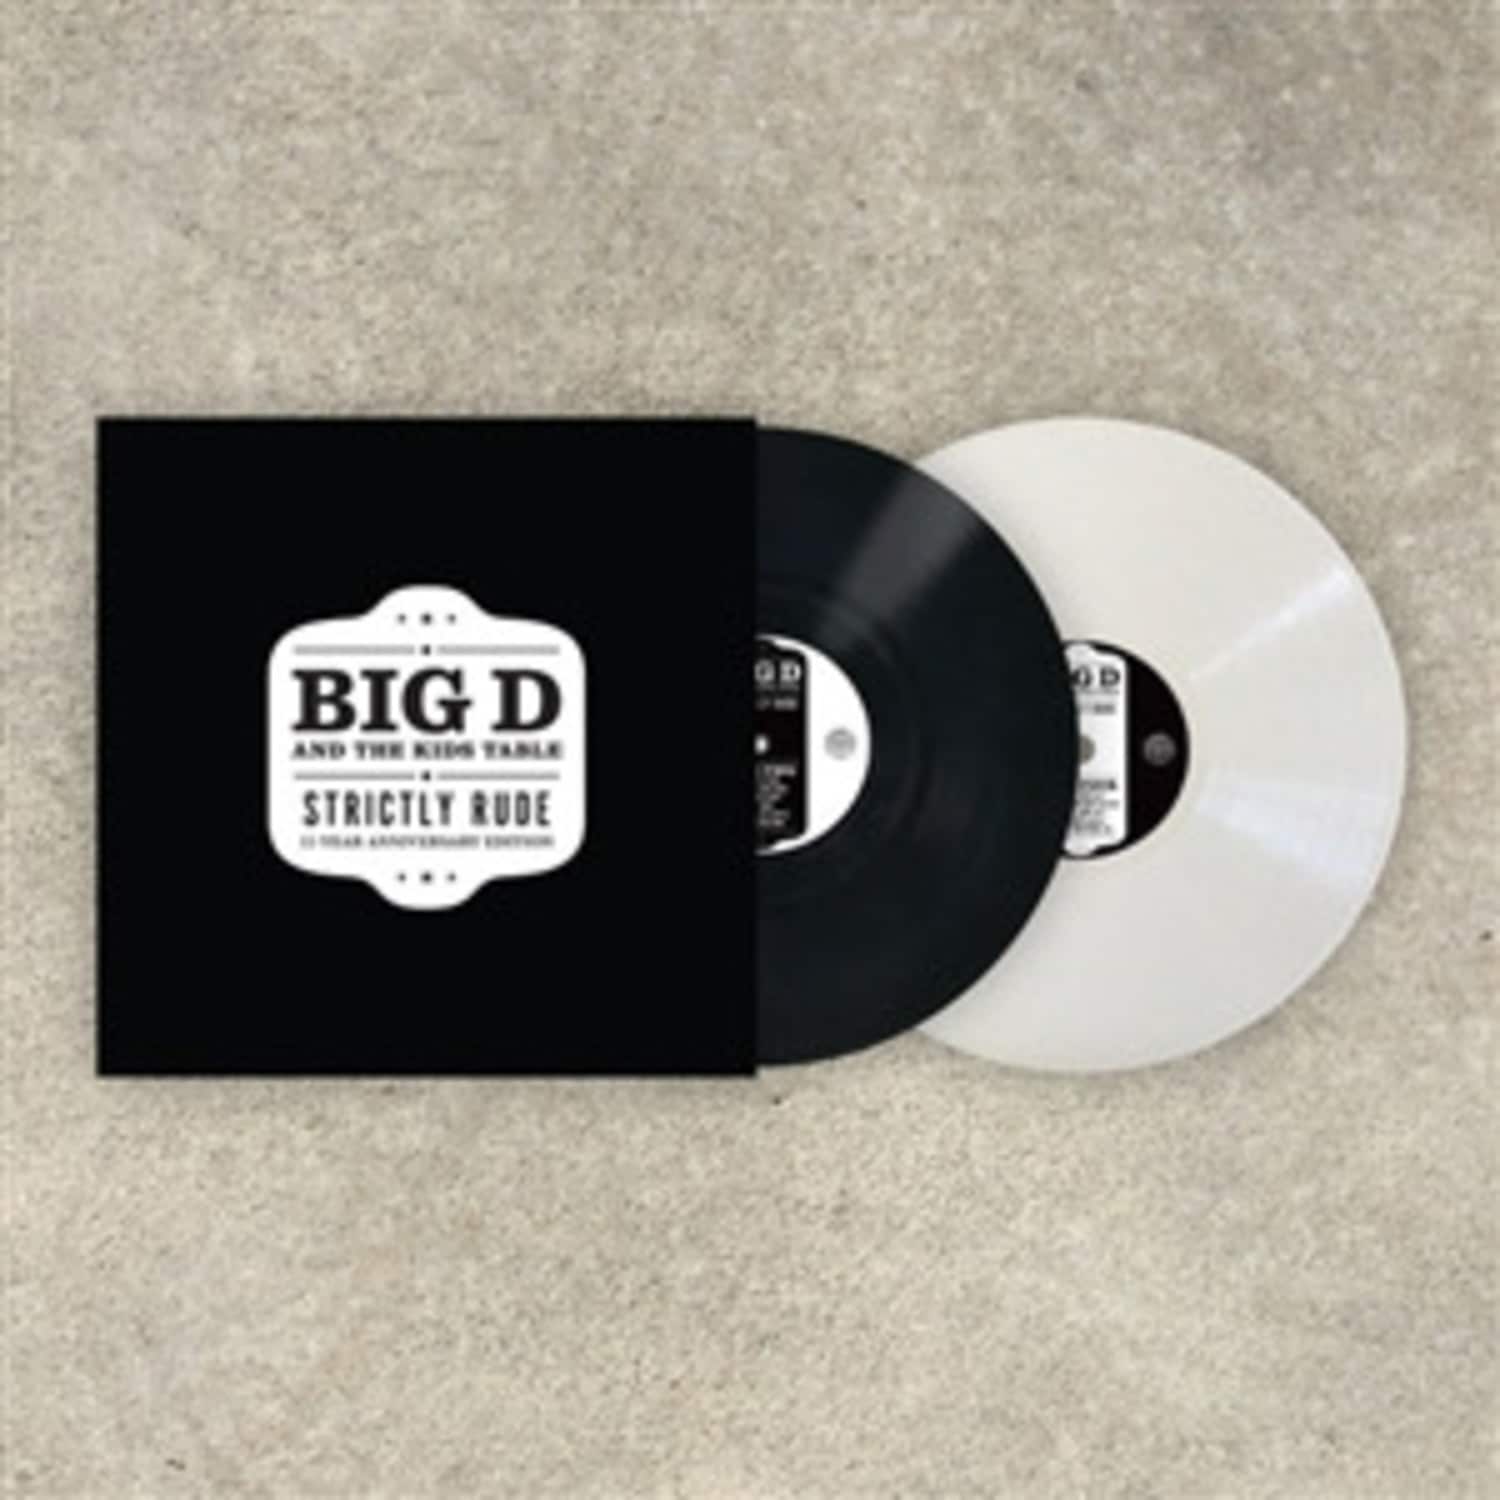 Big D And The Kids Table - STRICTLY RUDE - 15 YEAR ANNIVERSARY EDITION 